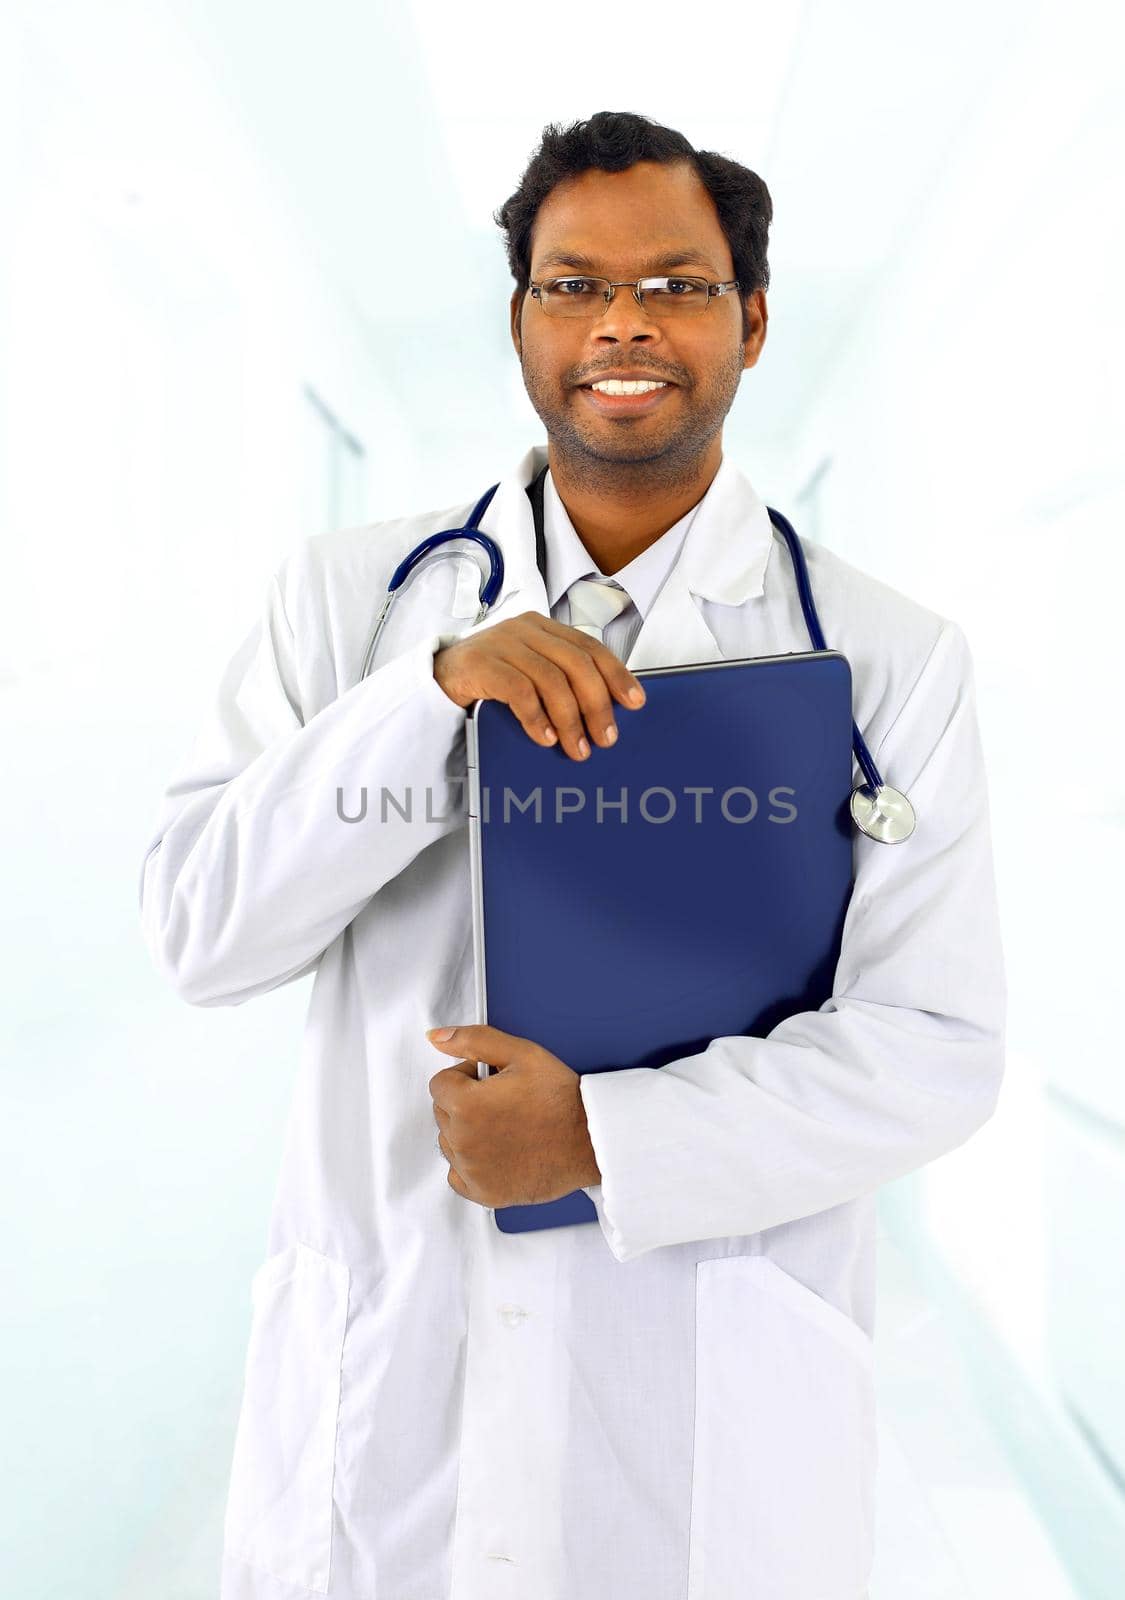 Àttractive young doctor